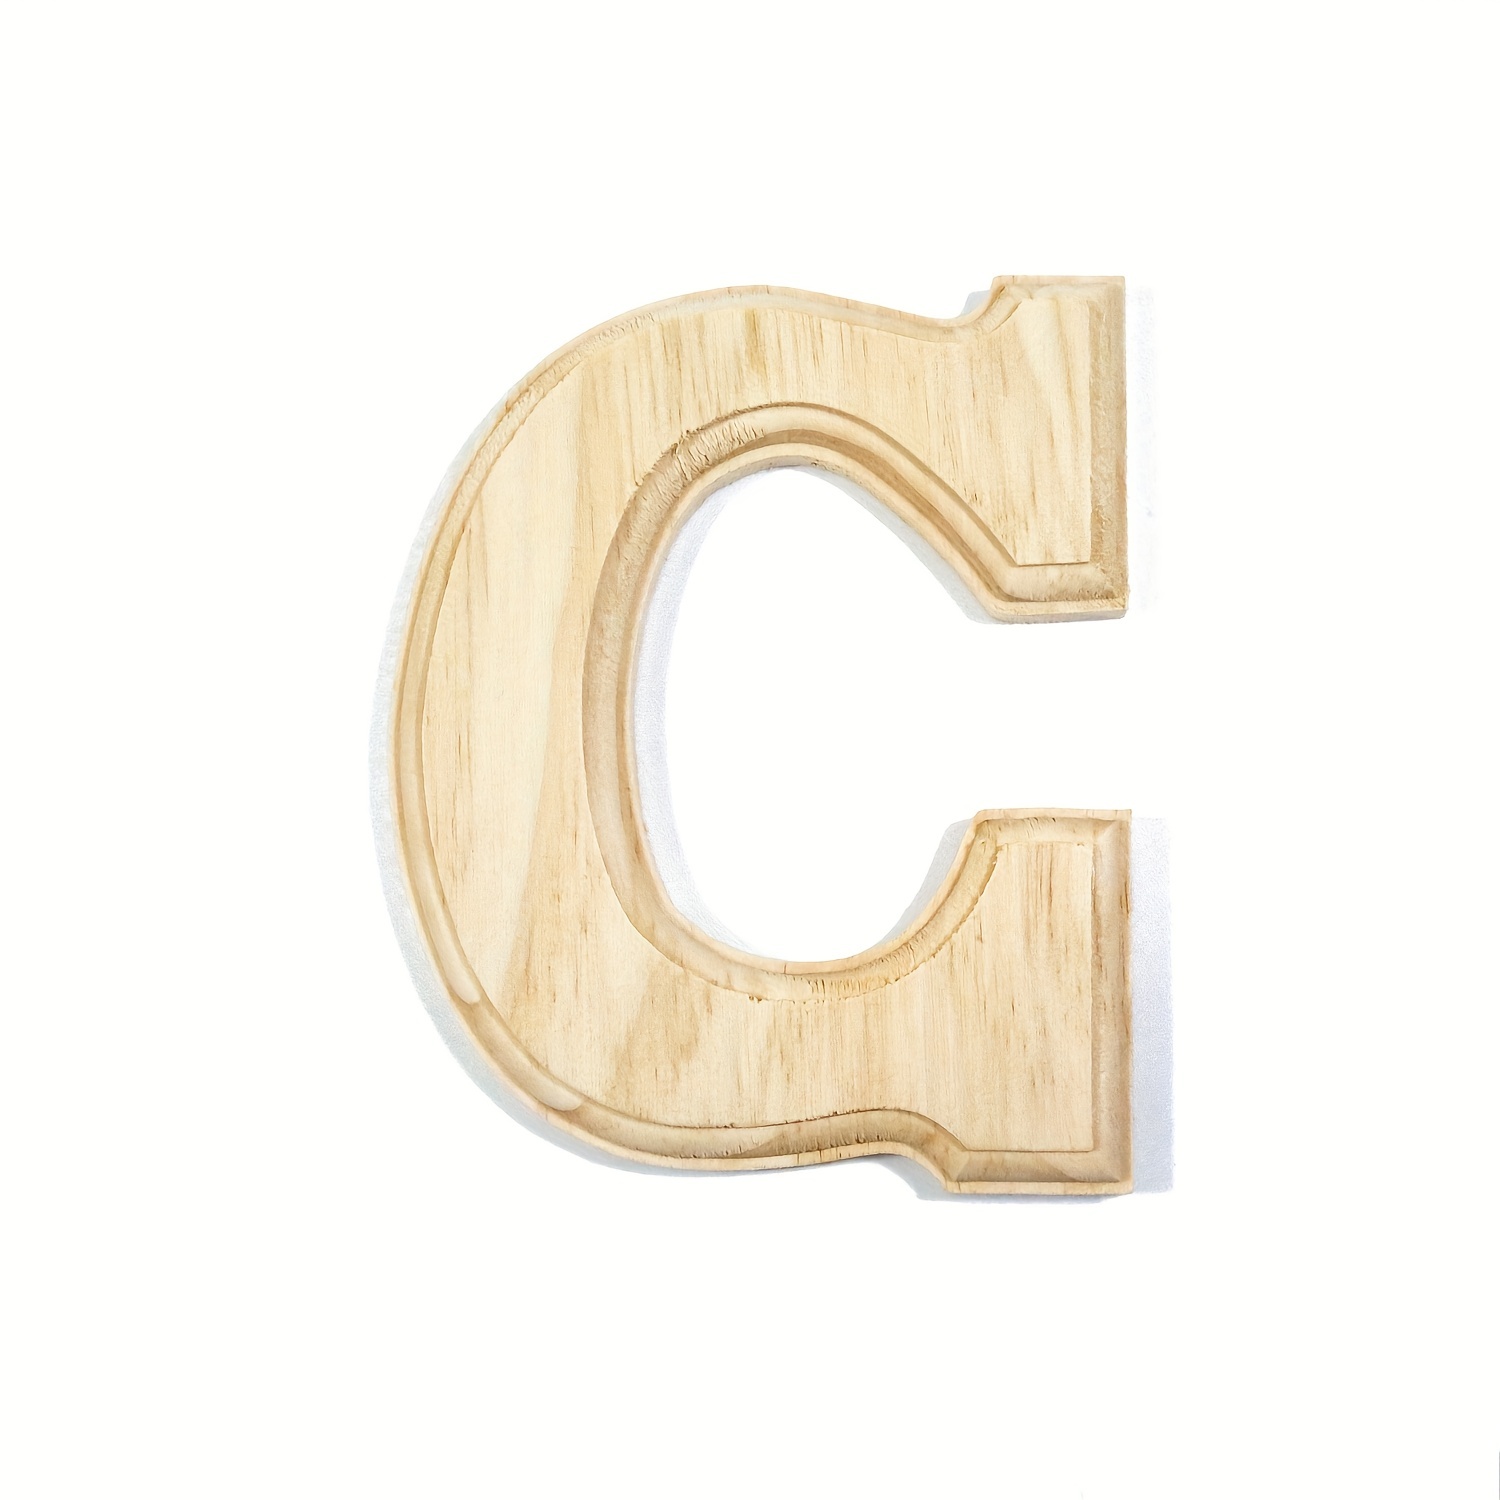 Cursive Wooden Letters C for Wall Decor 14 inch Large Wooden Letters Unfinished Monogram Wood Letter Crafts Alphabet Sign Cutouts for DIY Painting